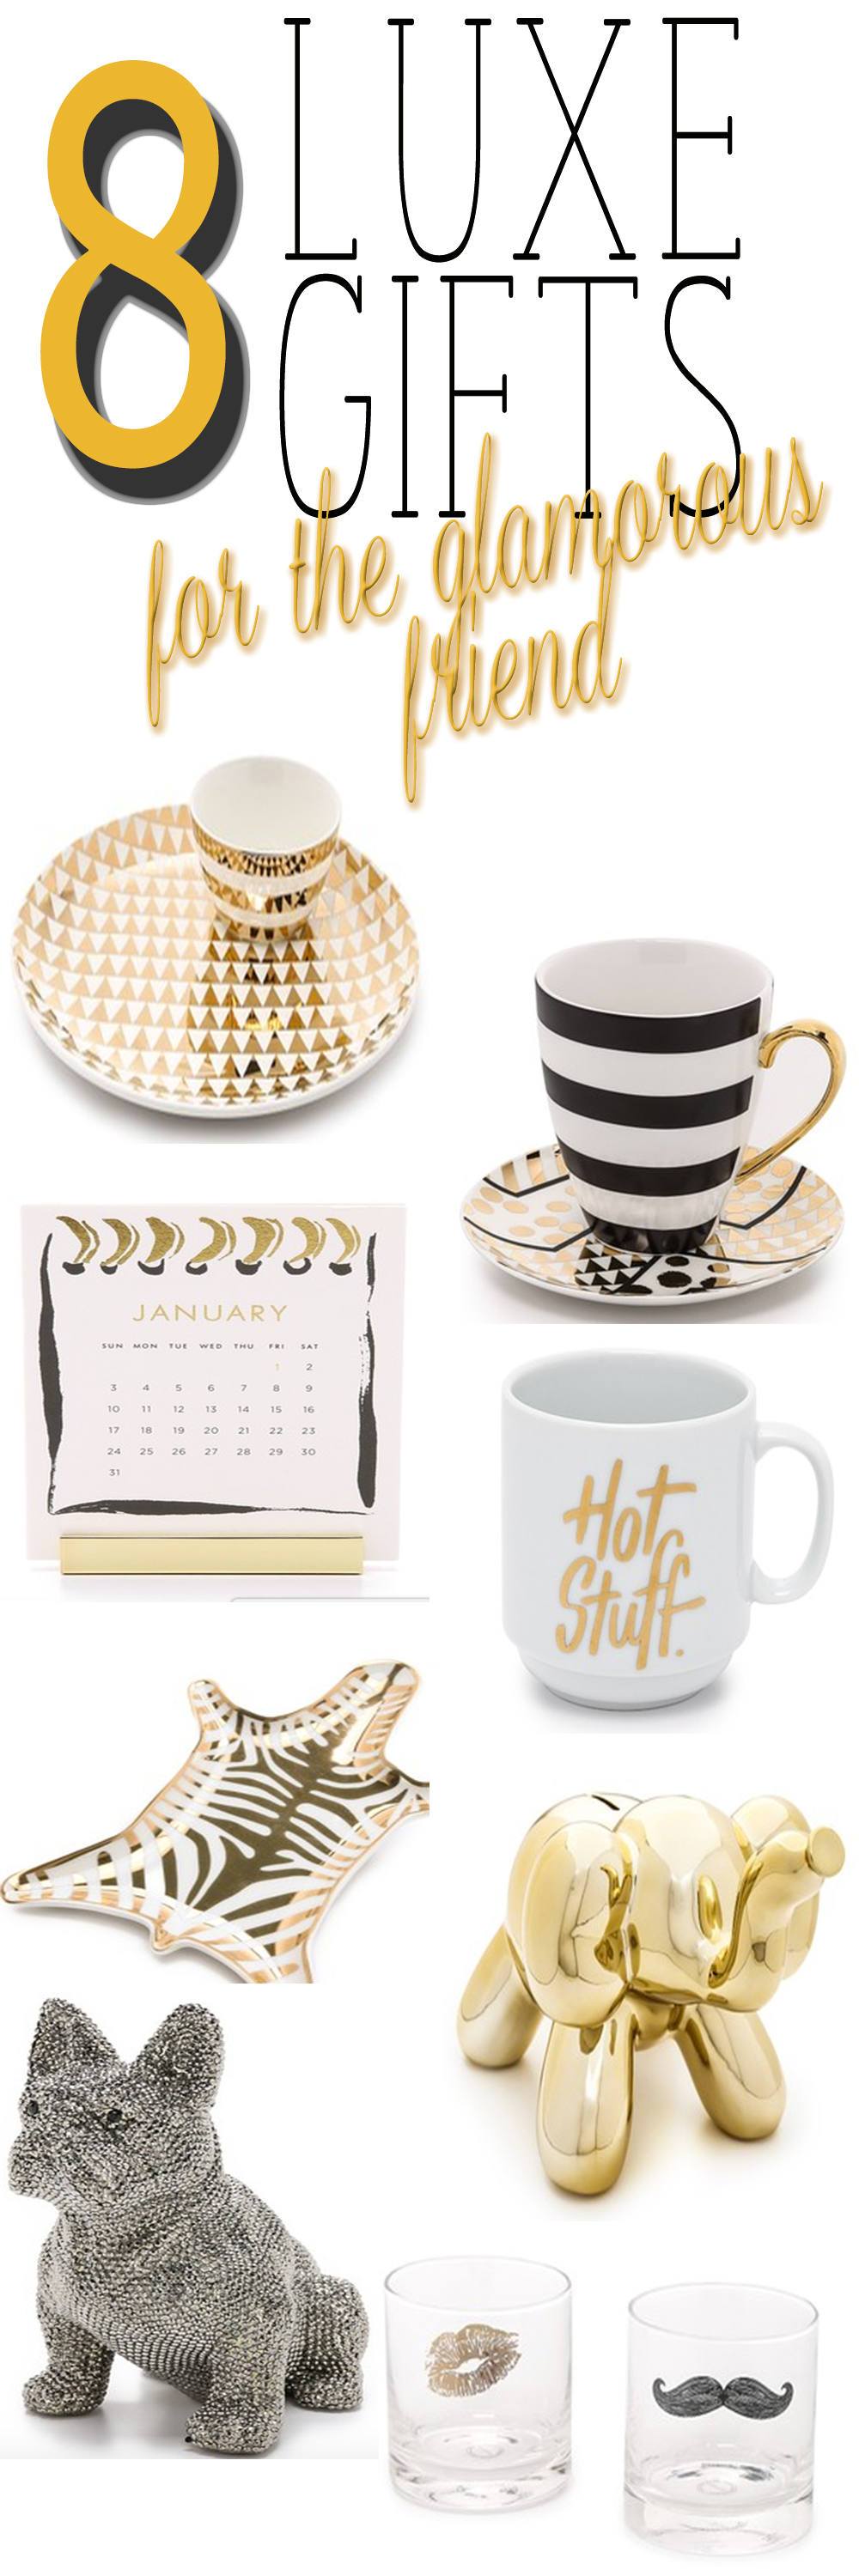 Eight Luxe Gift Ideas for the Glamorous Friend found at Shopbop |www.beingmelody.com| @beingmelody